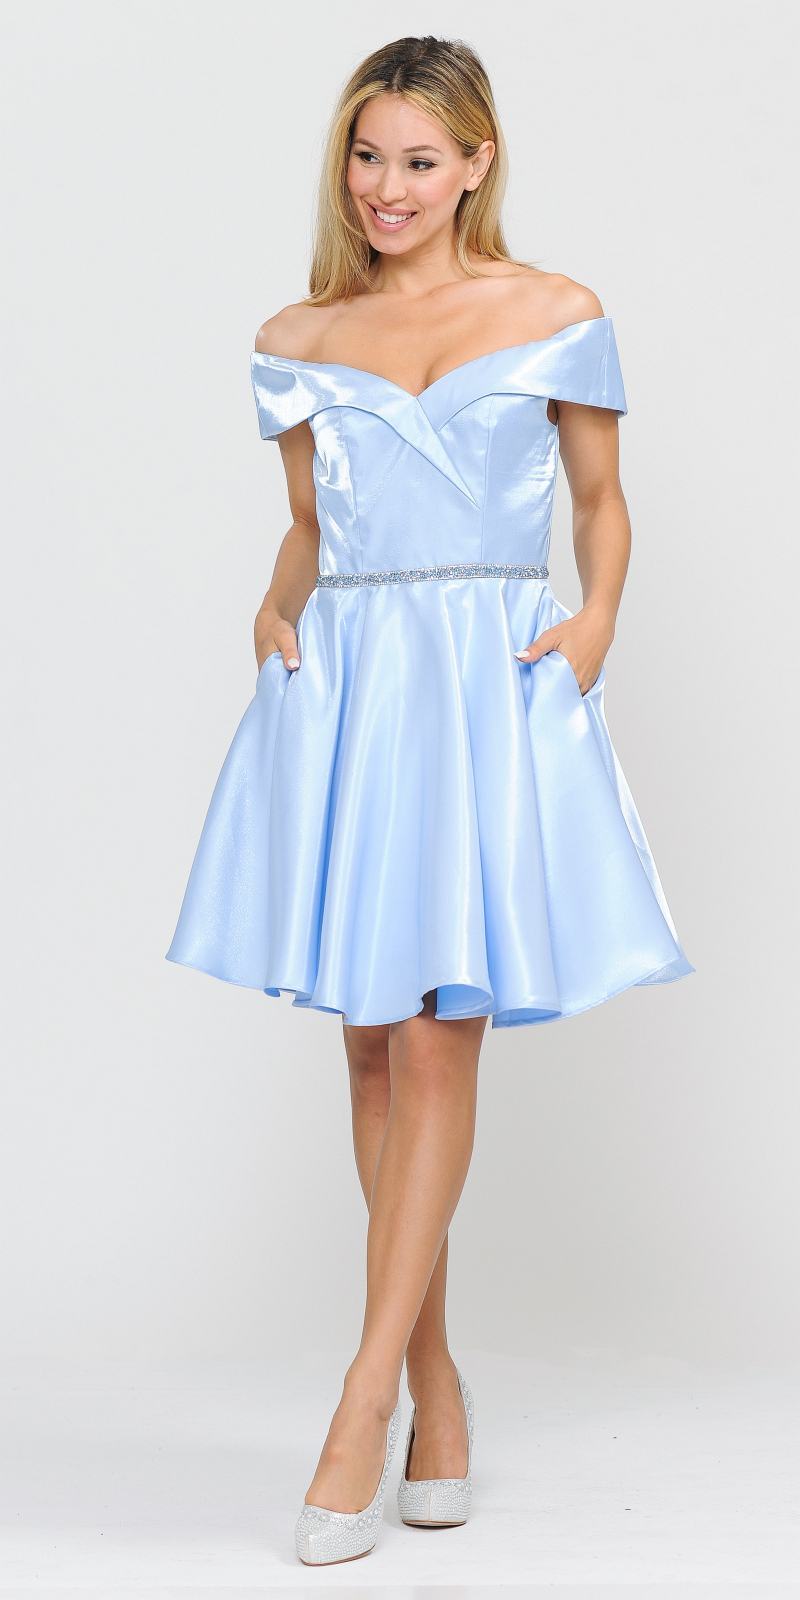 Poly USA 8238 Baby Blue Off-Shoulder Homecoming Short Dress with Pockets